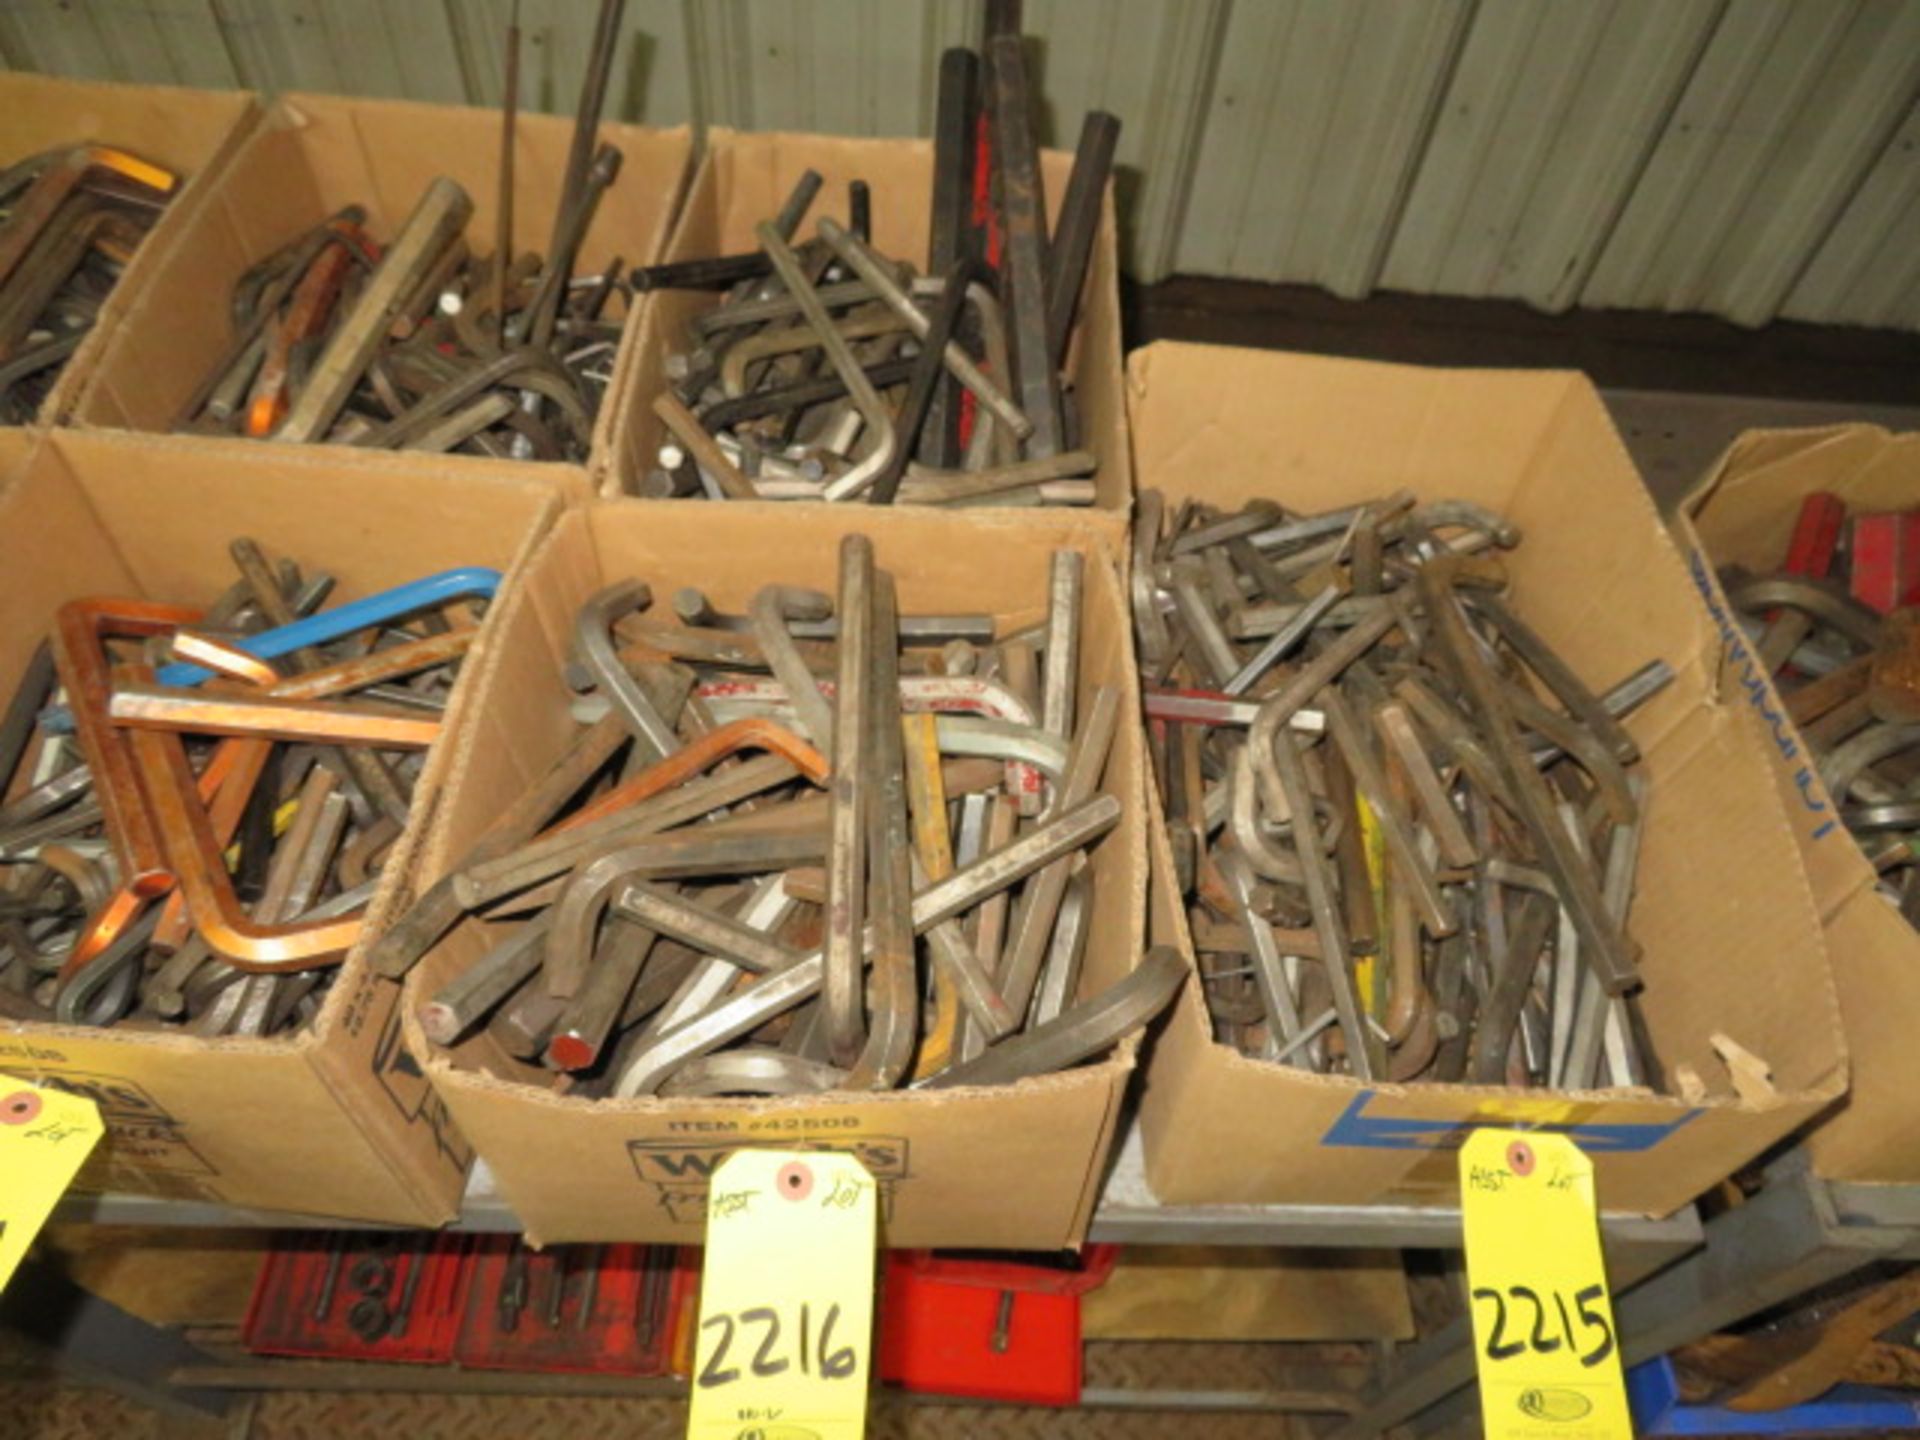 2 BINS OF ALLEN WRENCHES